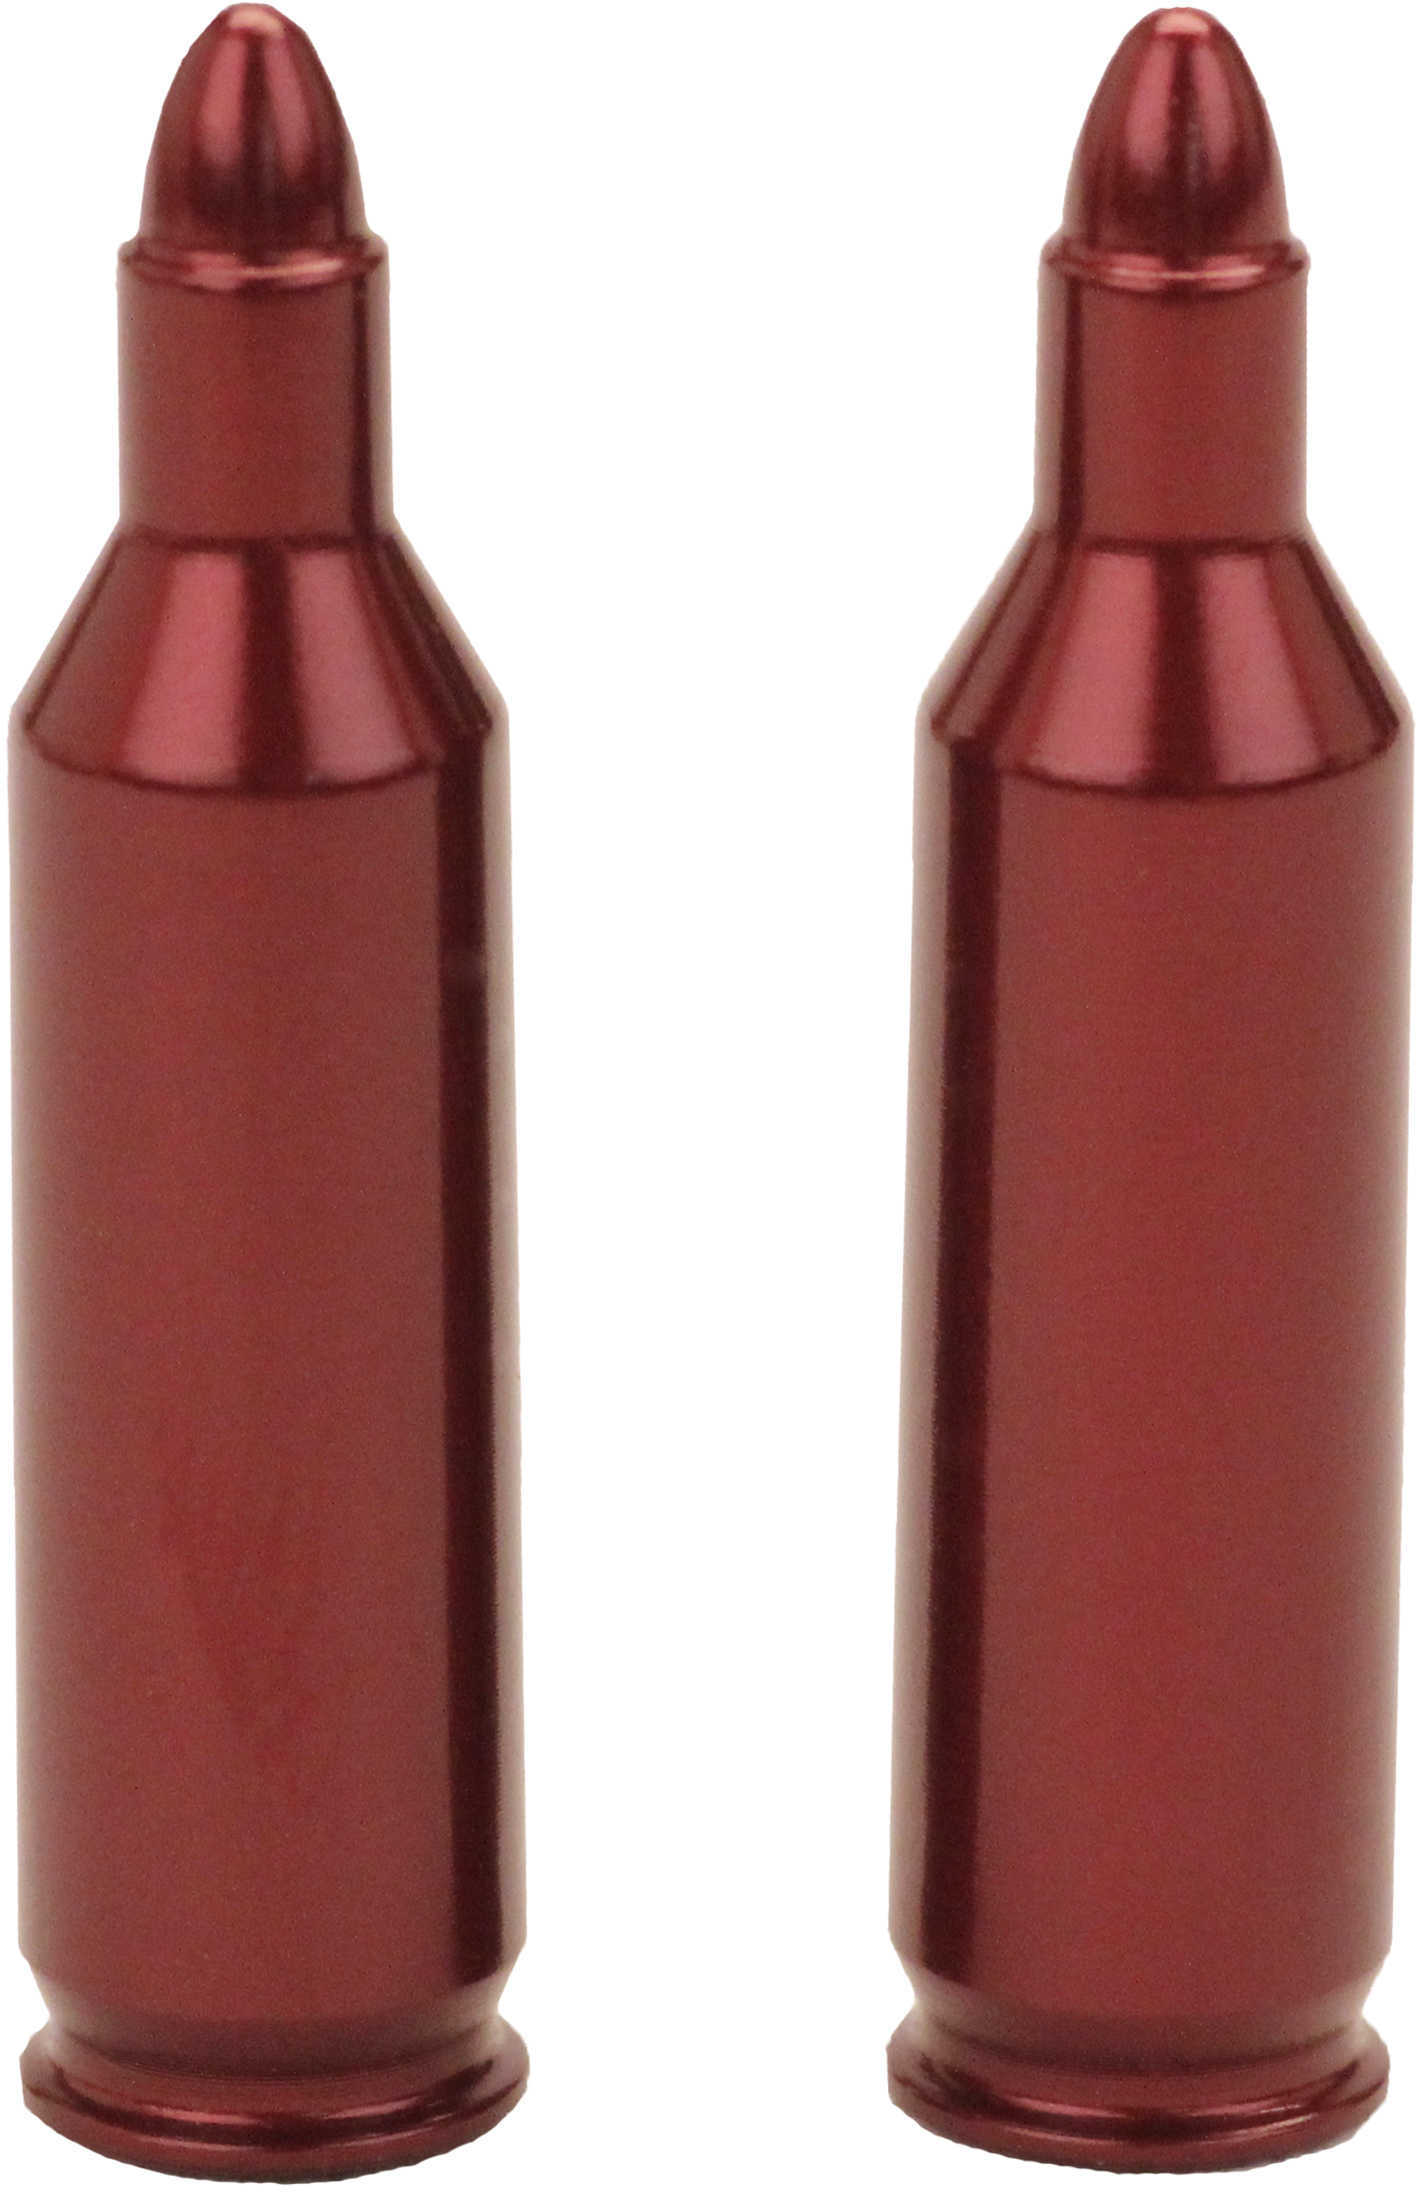 A-Zoom Rifle Metal Snap Caps 17 Remington Fireball, Pack Of 2 Md: 12201